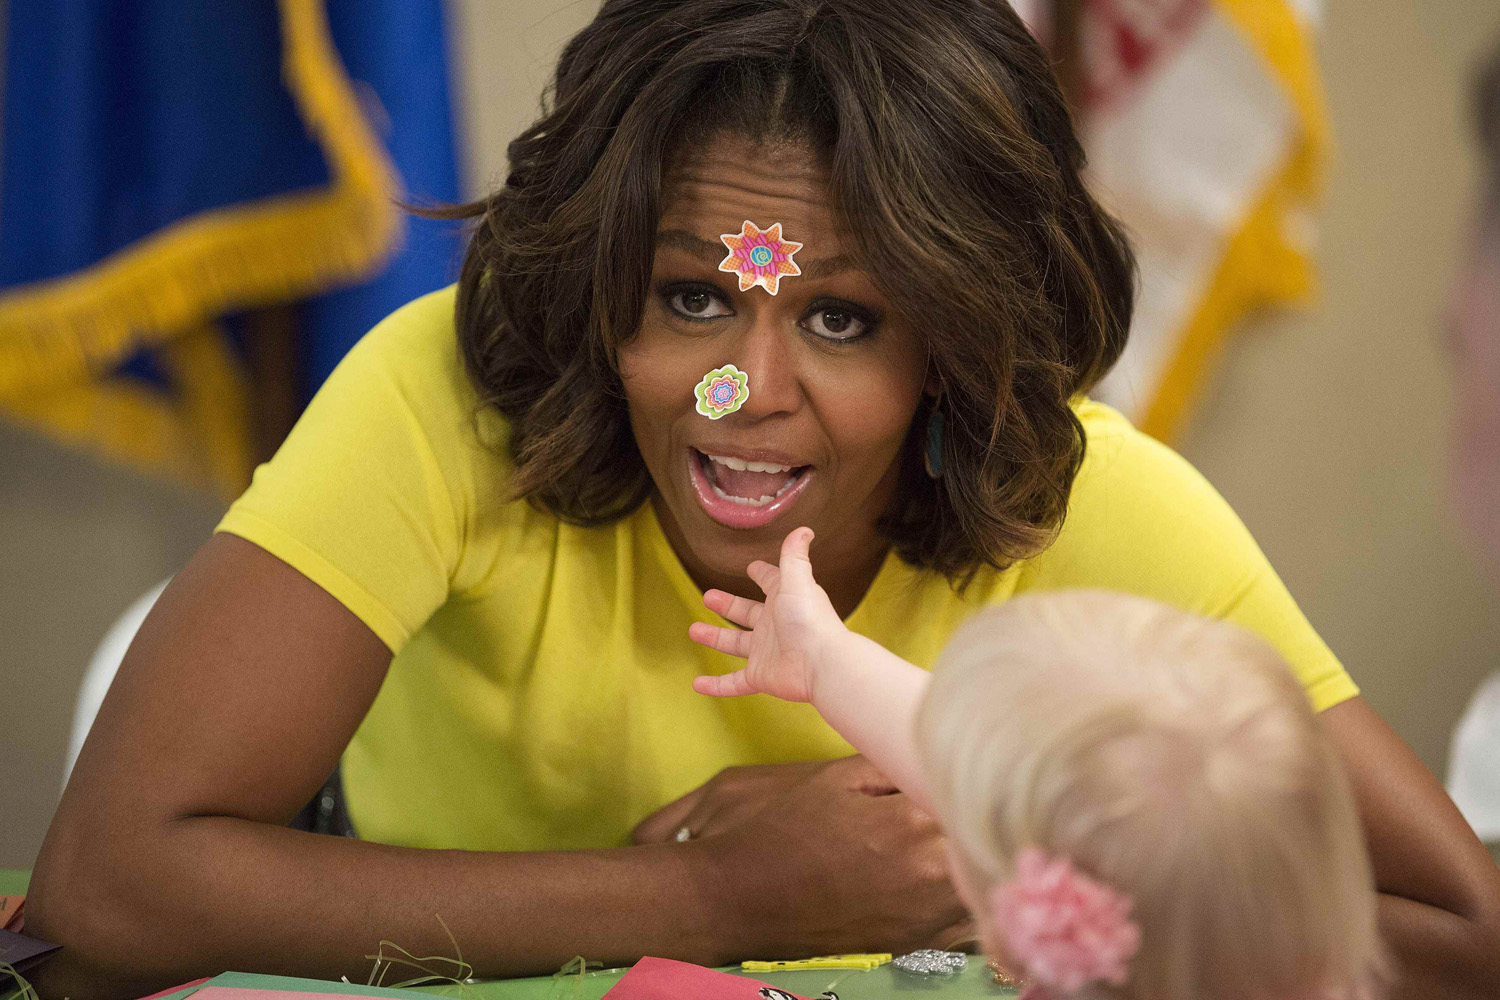 U.S. first lady Obama has stickers put on her face by 20-month-old Oppelt during visit with children at Fisher House at Walter Reed National Military Medical Center in Bethesda